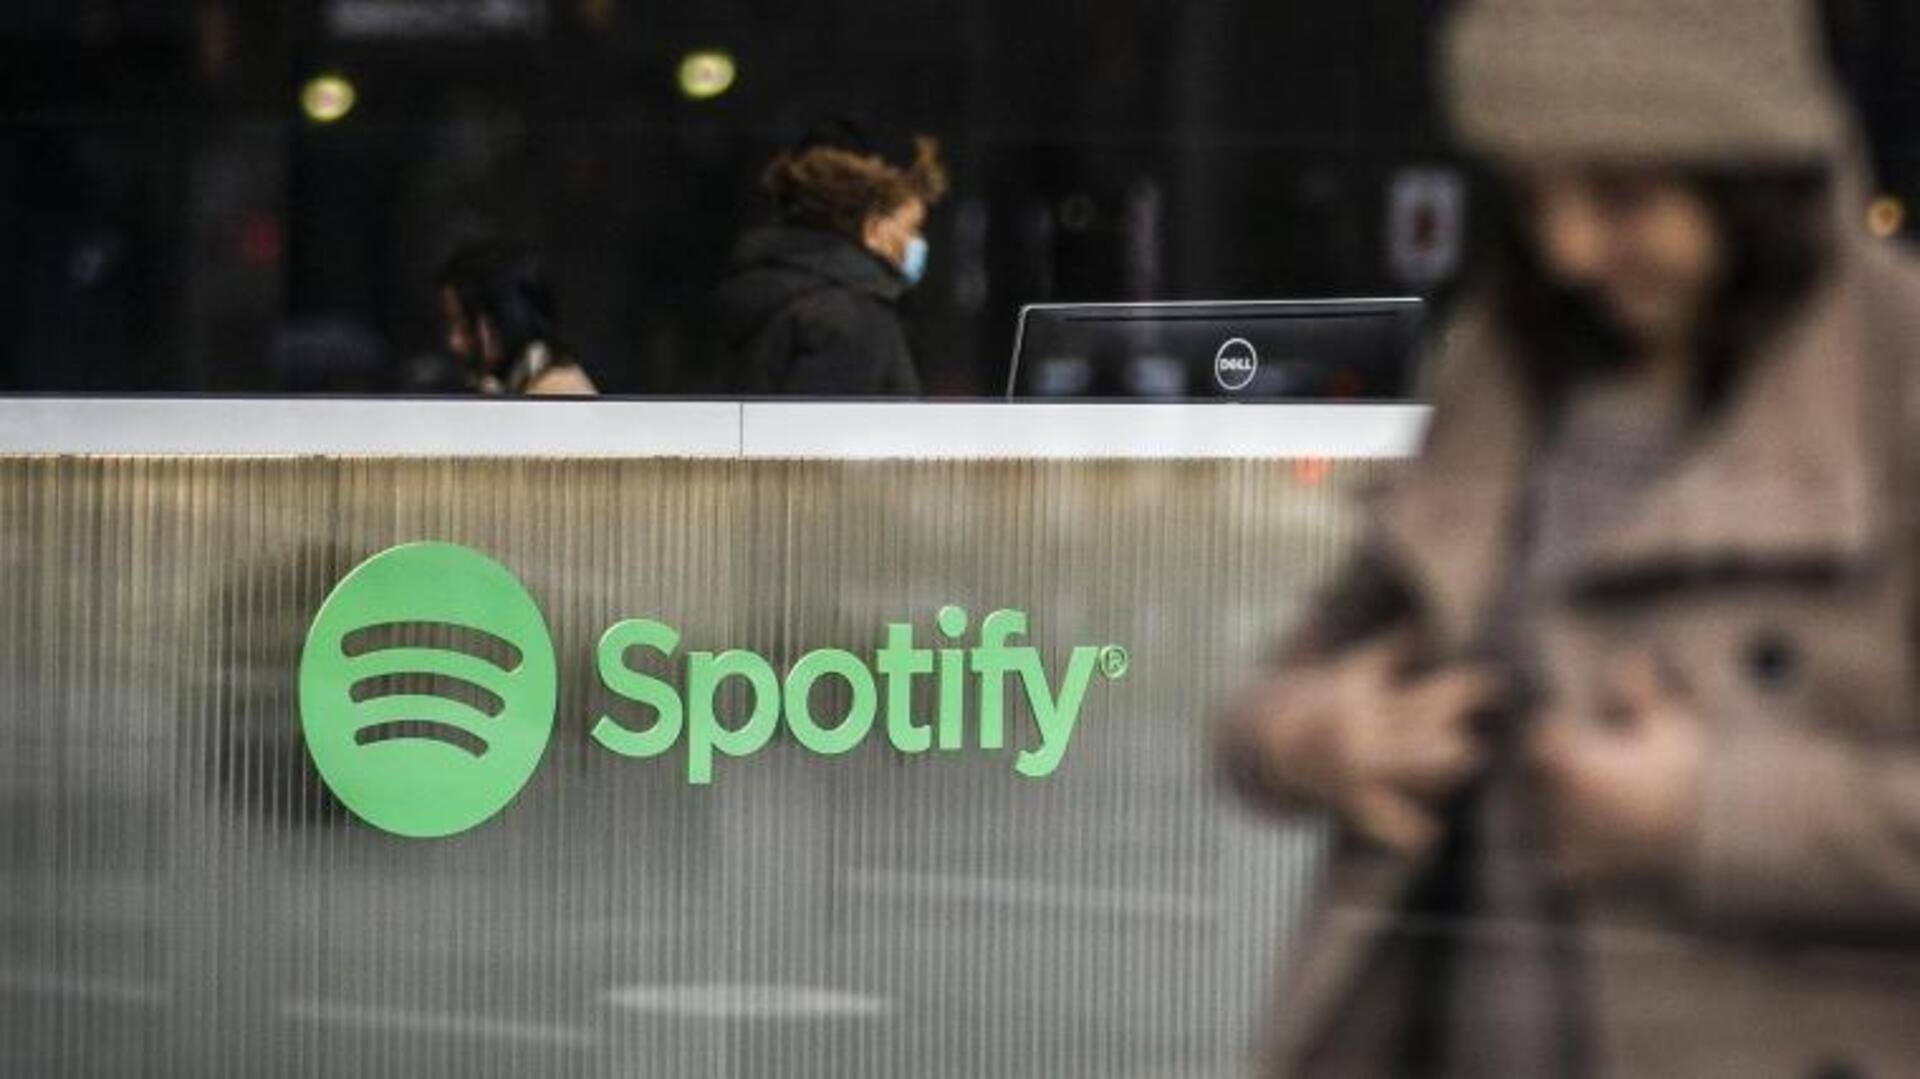 Spotify has 600M monthly active users, including 236M premium subscribers